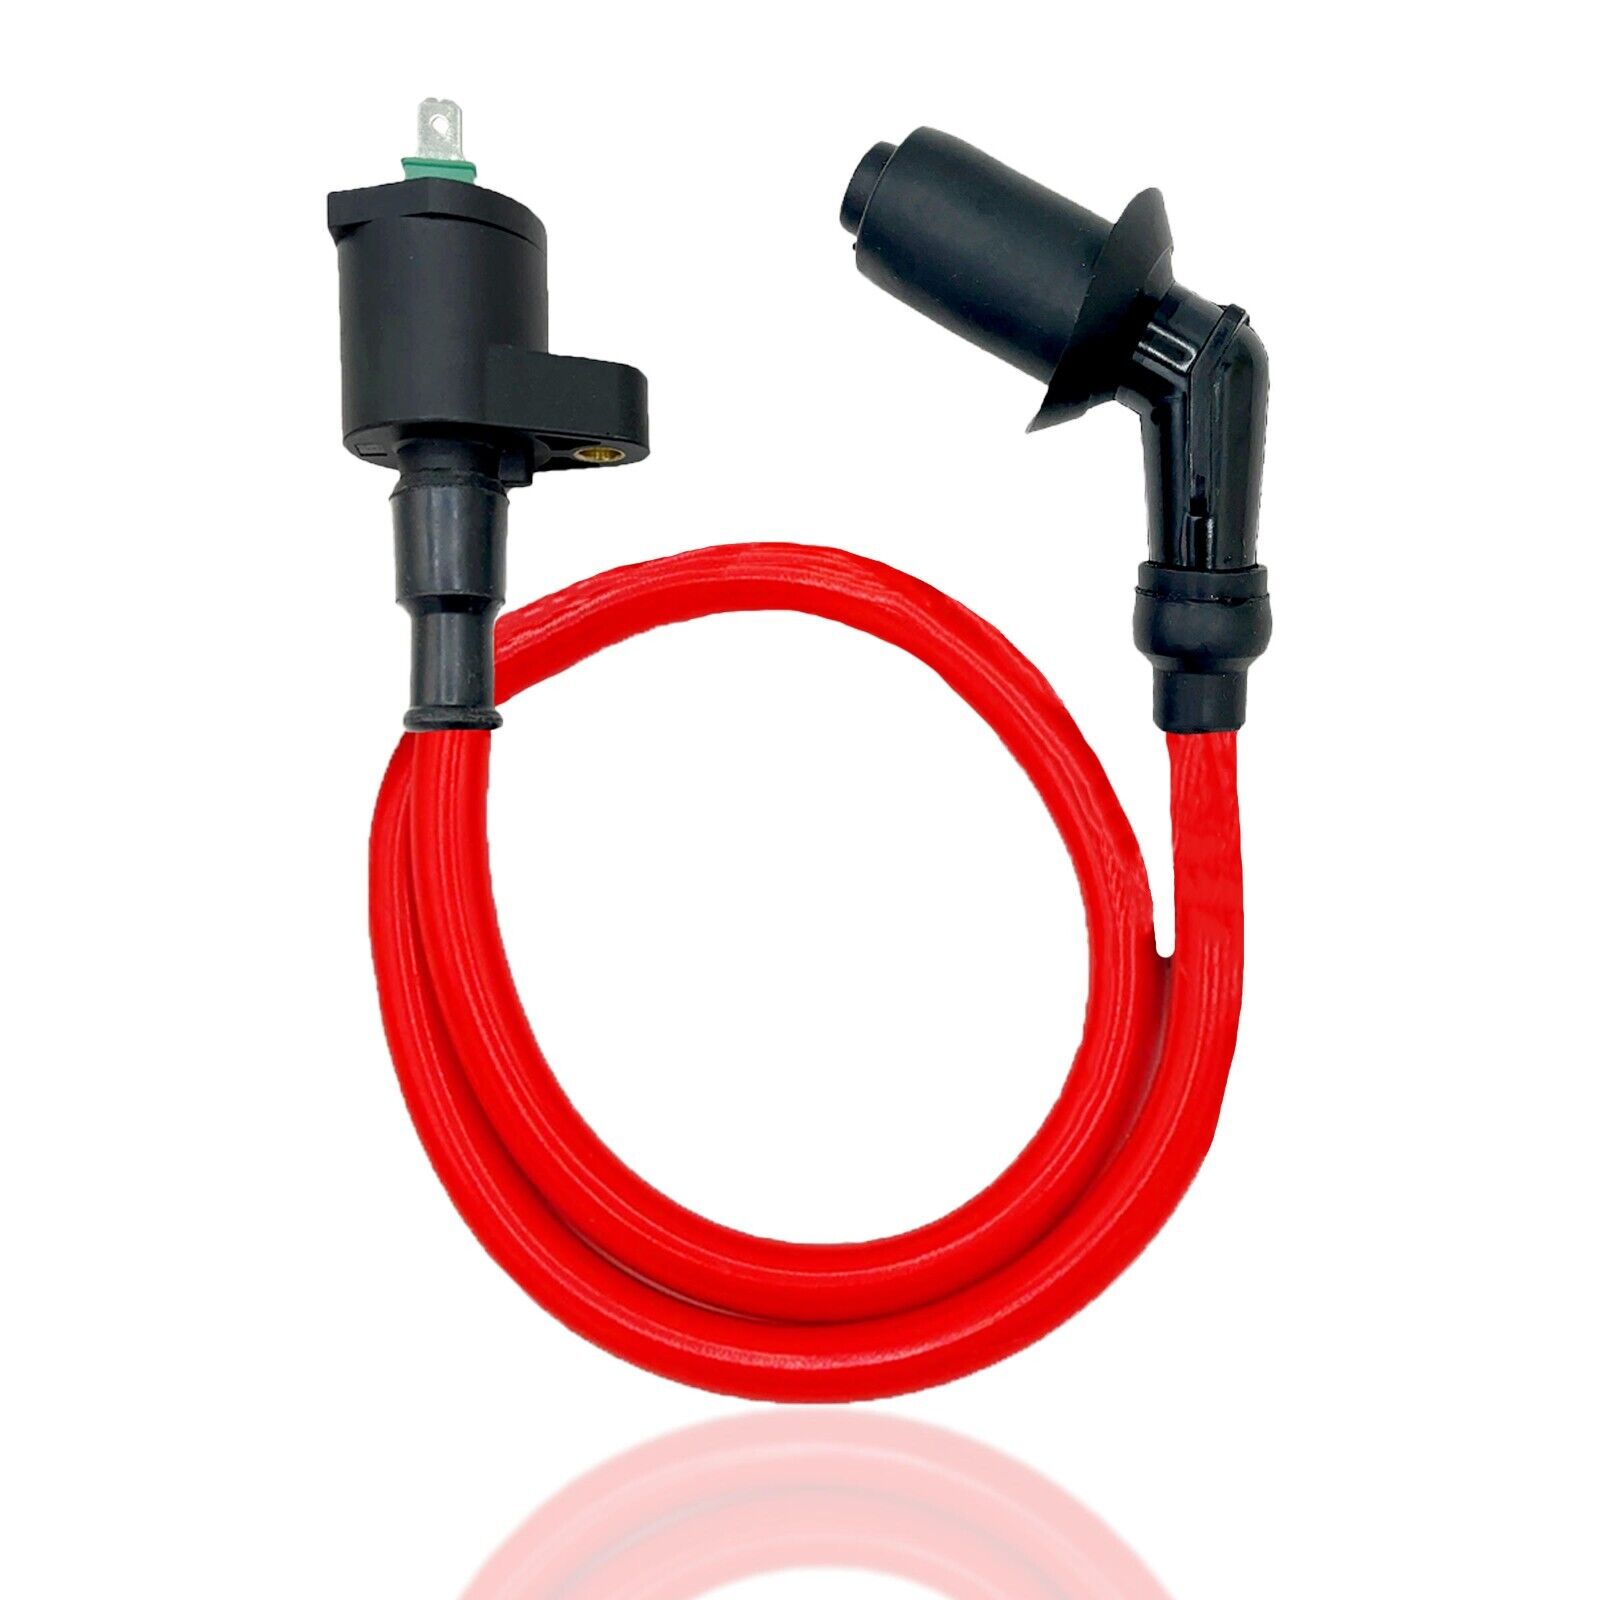 RACING IGNITION COIL Gy6 50CC-150CC FOR SCOOTER MOPED ATV GO KART TAOTAO